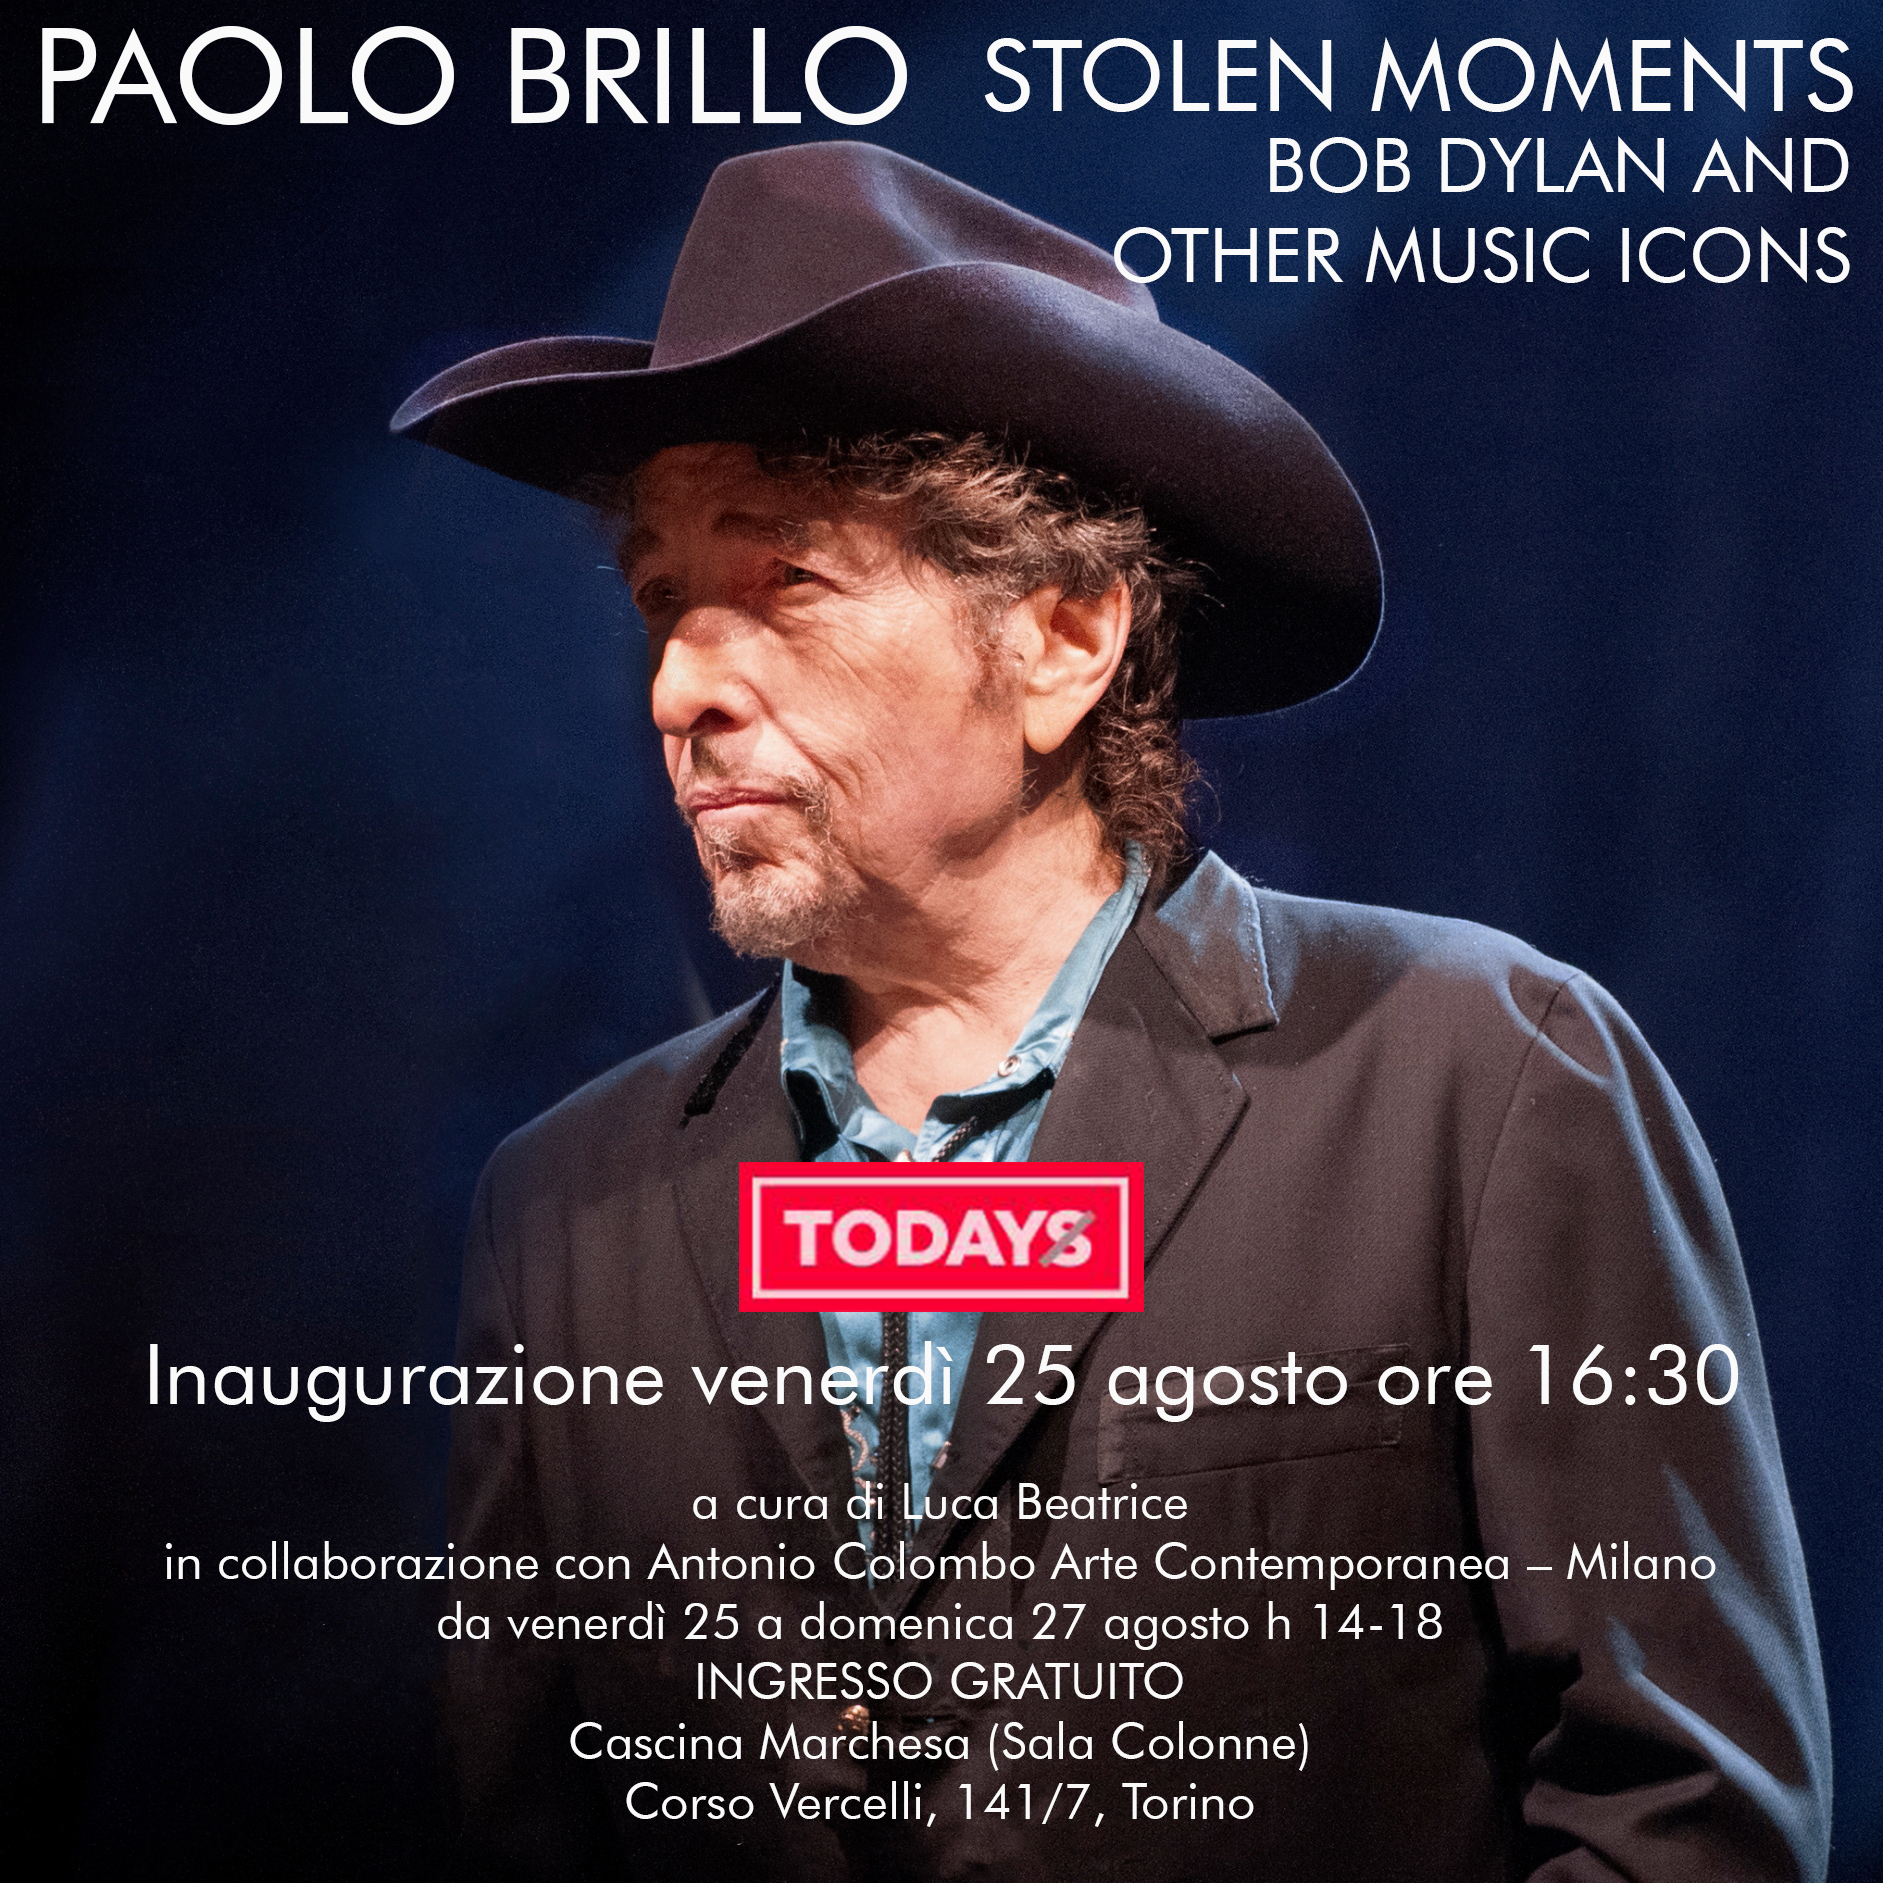 ''STOLEN MOMENTS: Bob Dylan and other music icons'' di Paolo Brillo